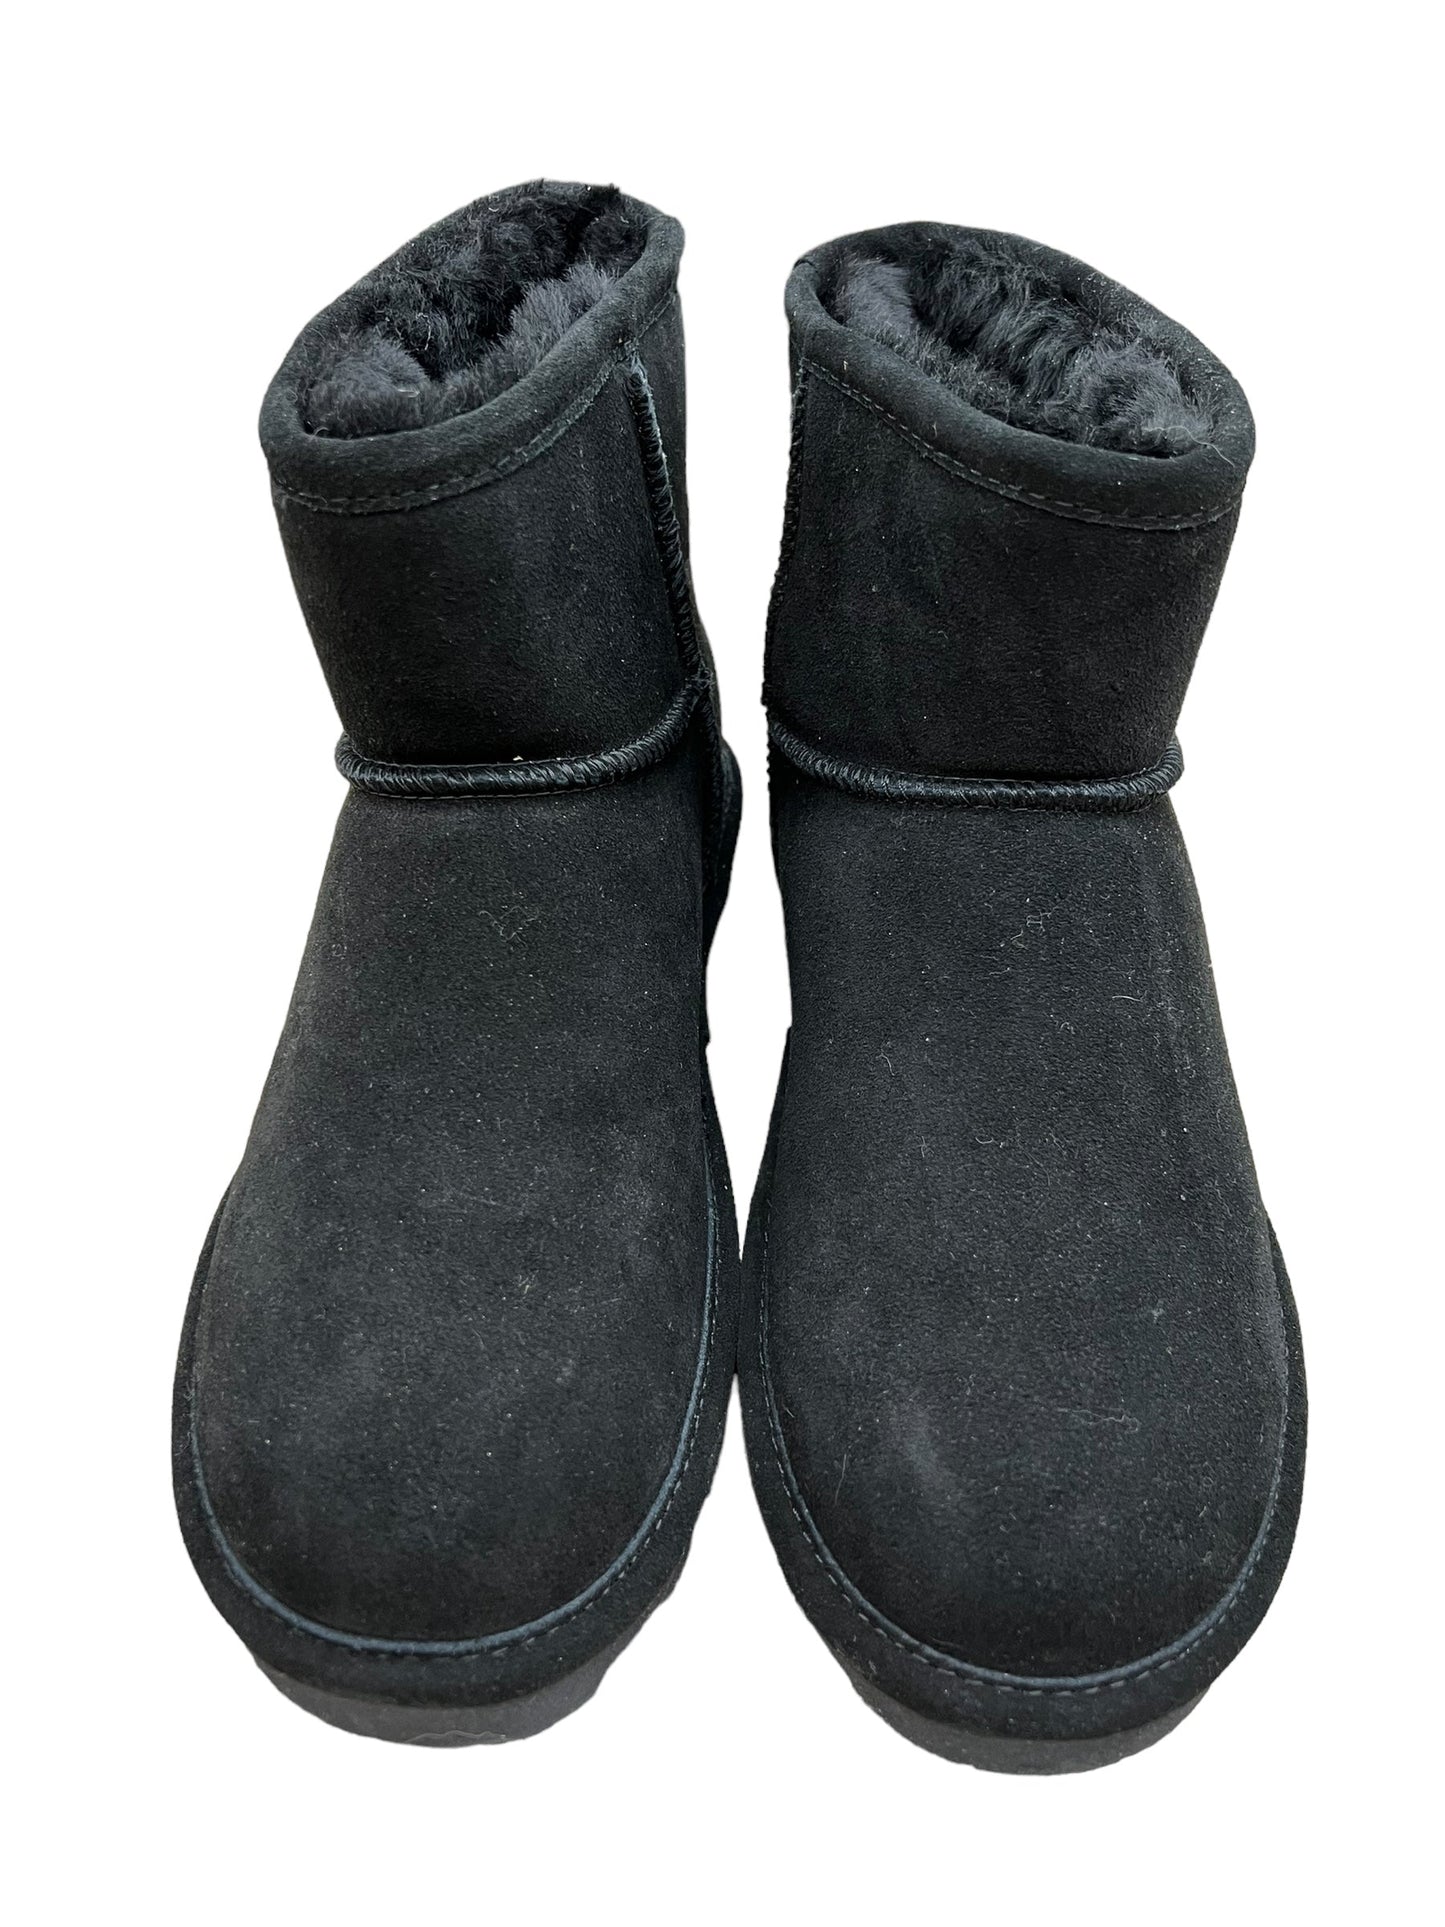 Boots Leather By Bearpaw  Size: 10